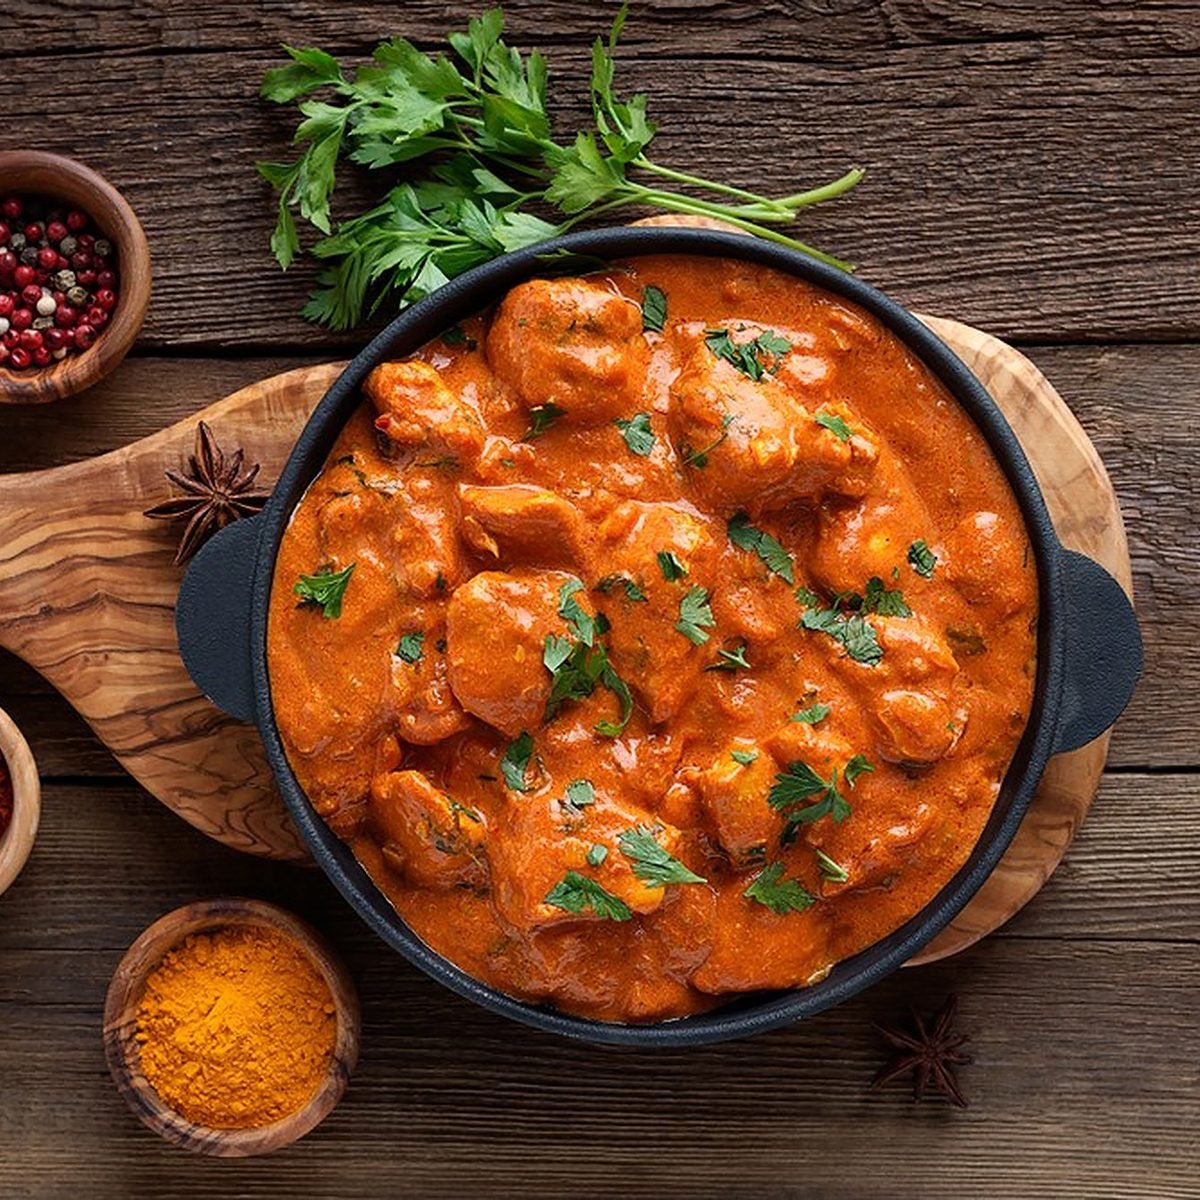 https://www.tasteofhome.com/wp-content/uploads/2021/01/tasty-butter-chicken-curry-dish-from-indian-cuisine-1277362334.jpg